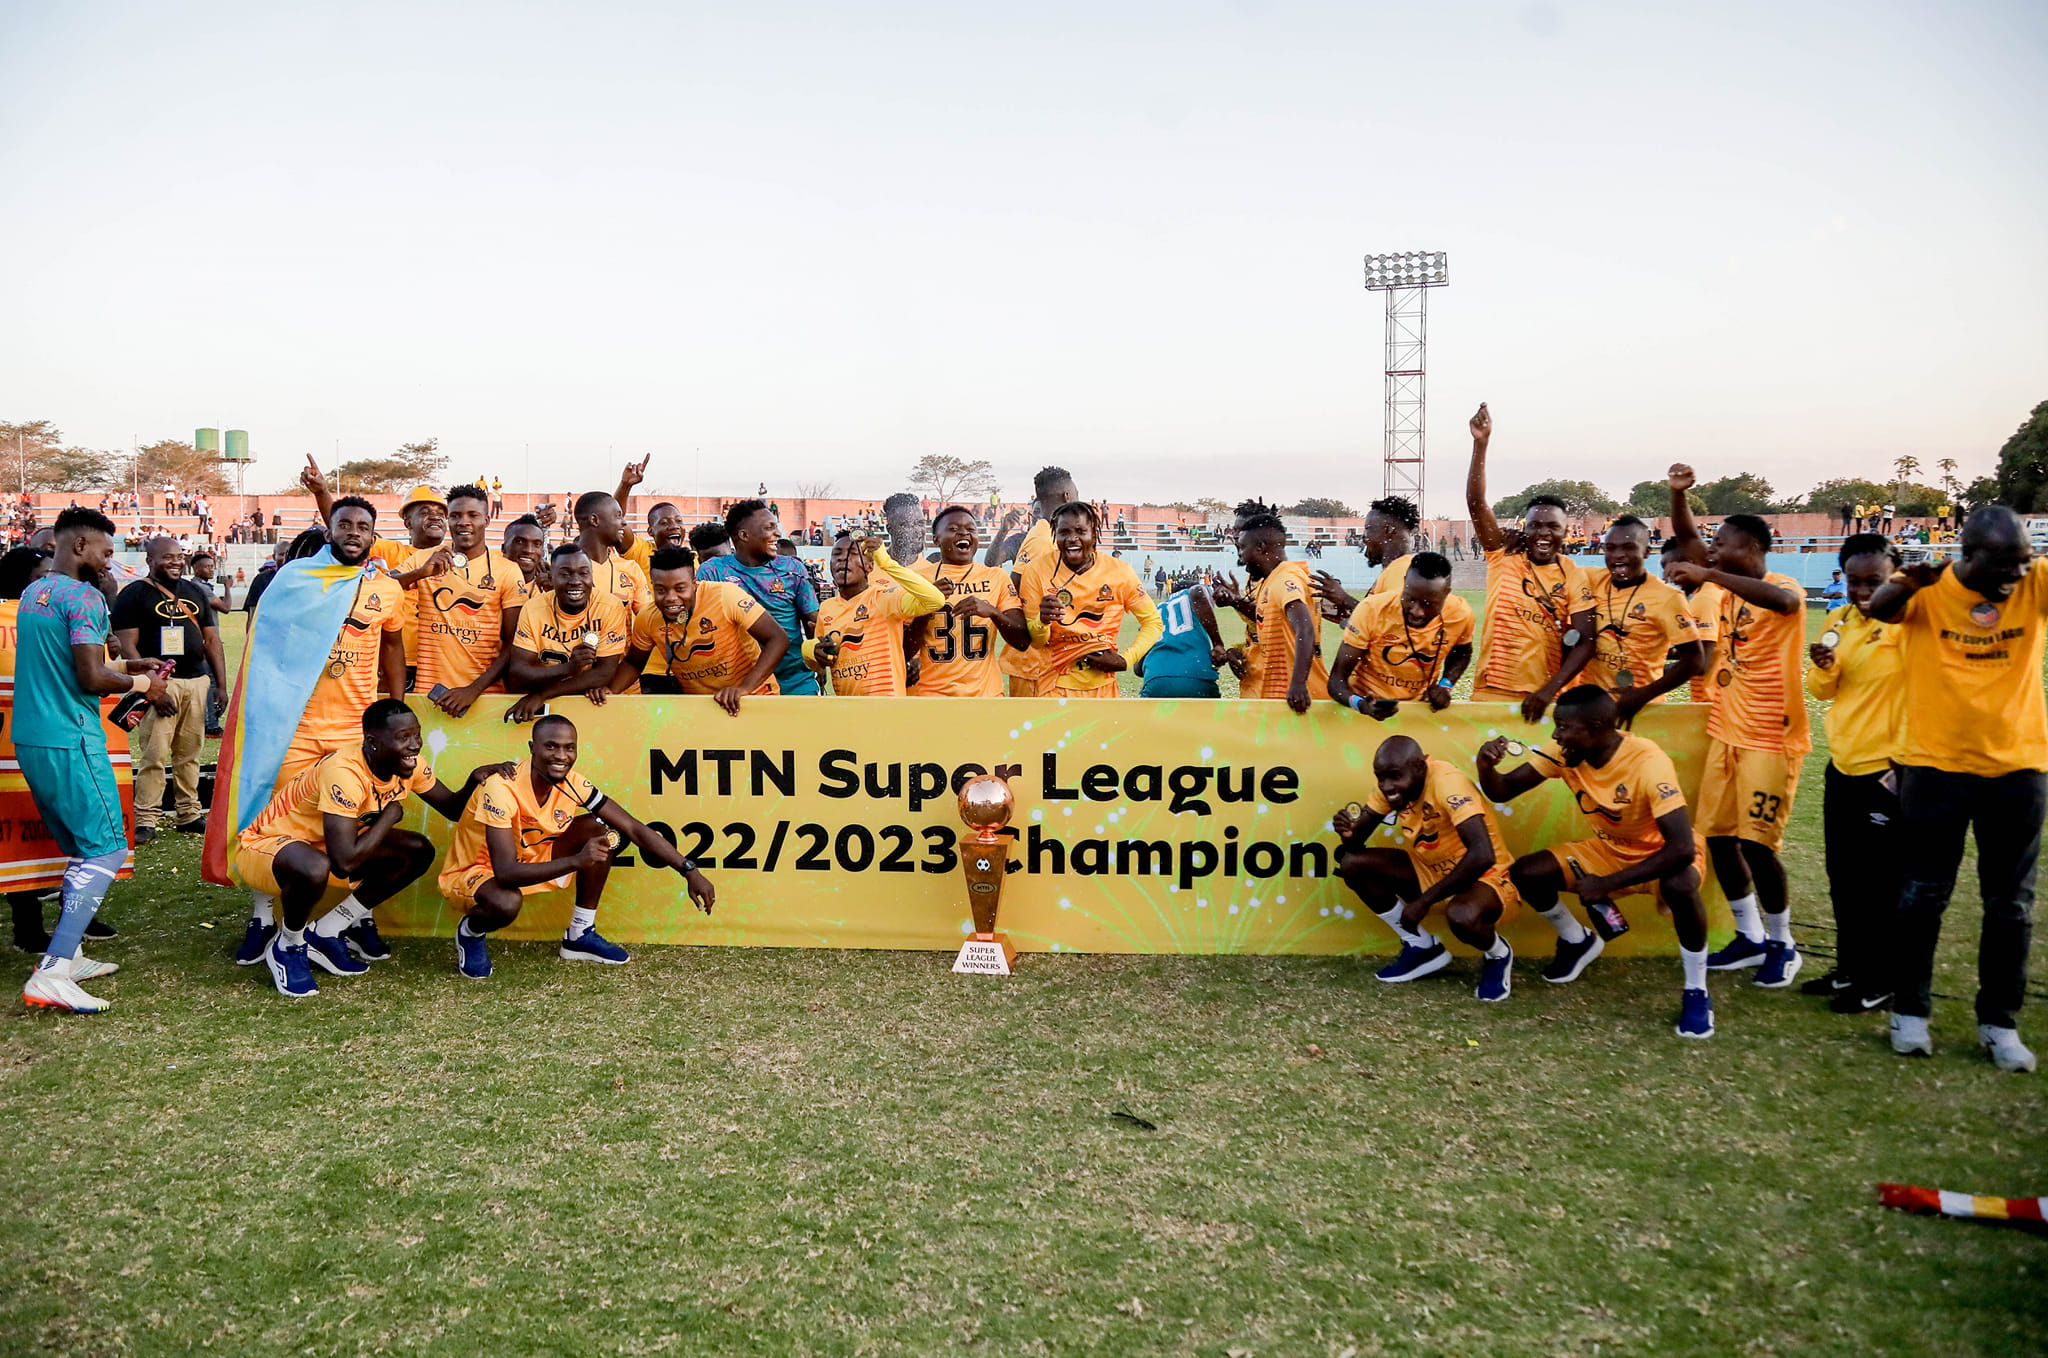 Teams competing in the 2023/24 Season of the MTN Super League